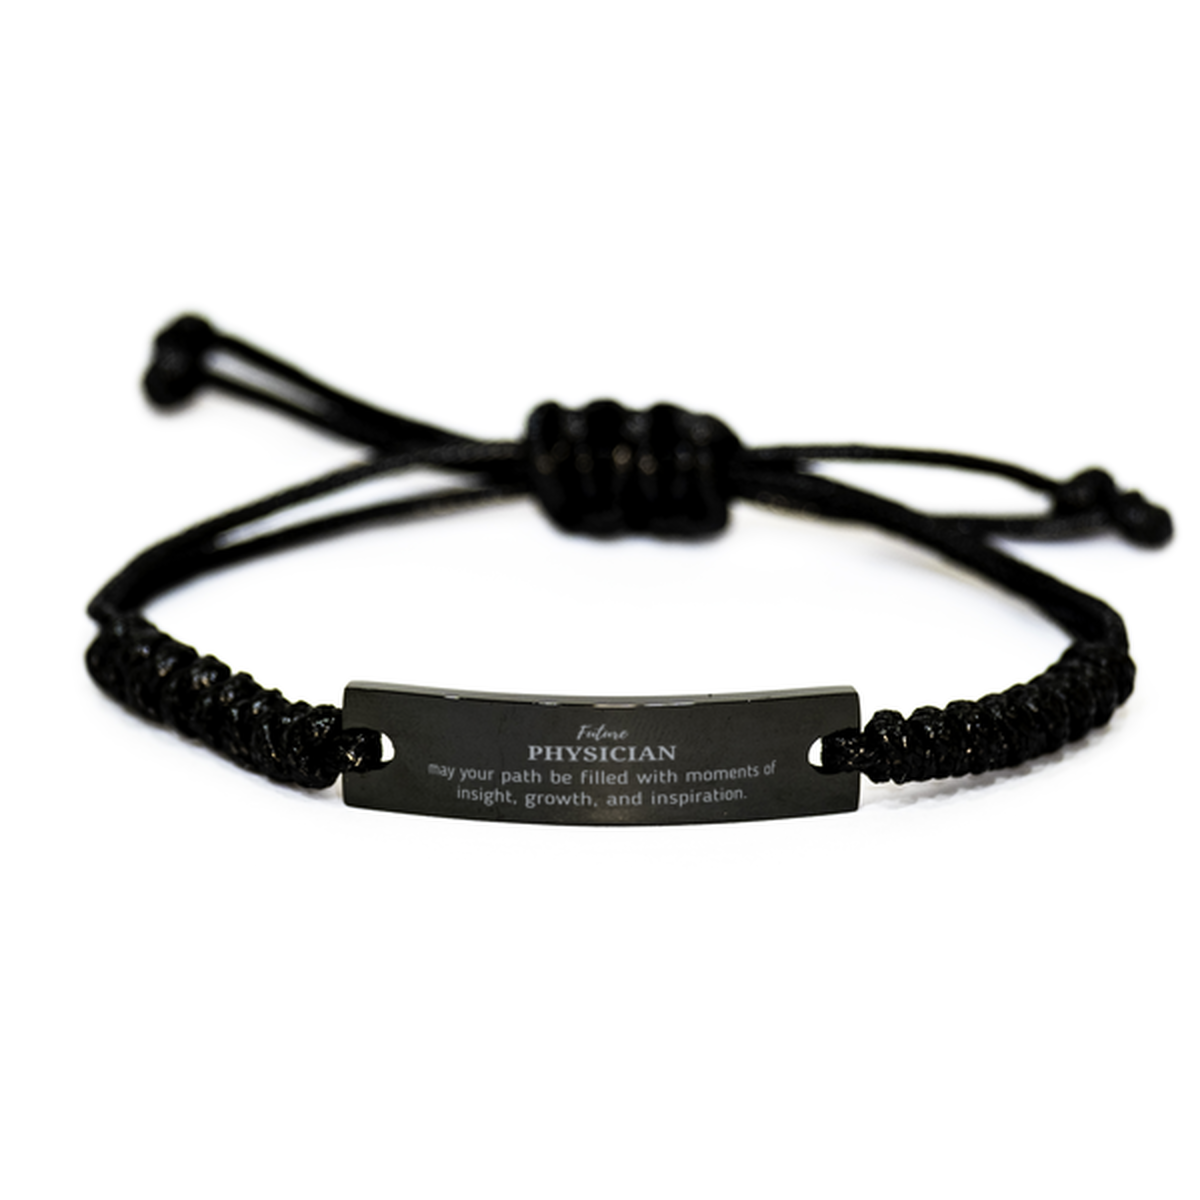 Future Physician Gifts, May your path be filled with moments of insight, Graduation Gifts for New Physician, Christmas Unique Black Rope Bracelet For Men, Women, Friends